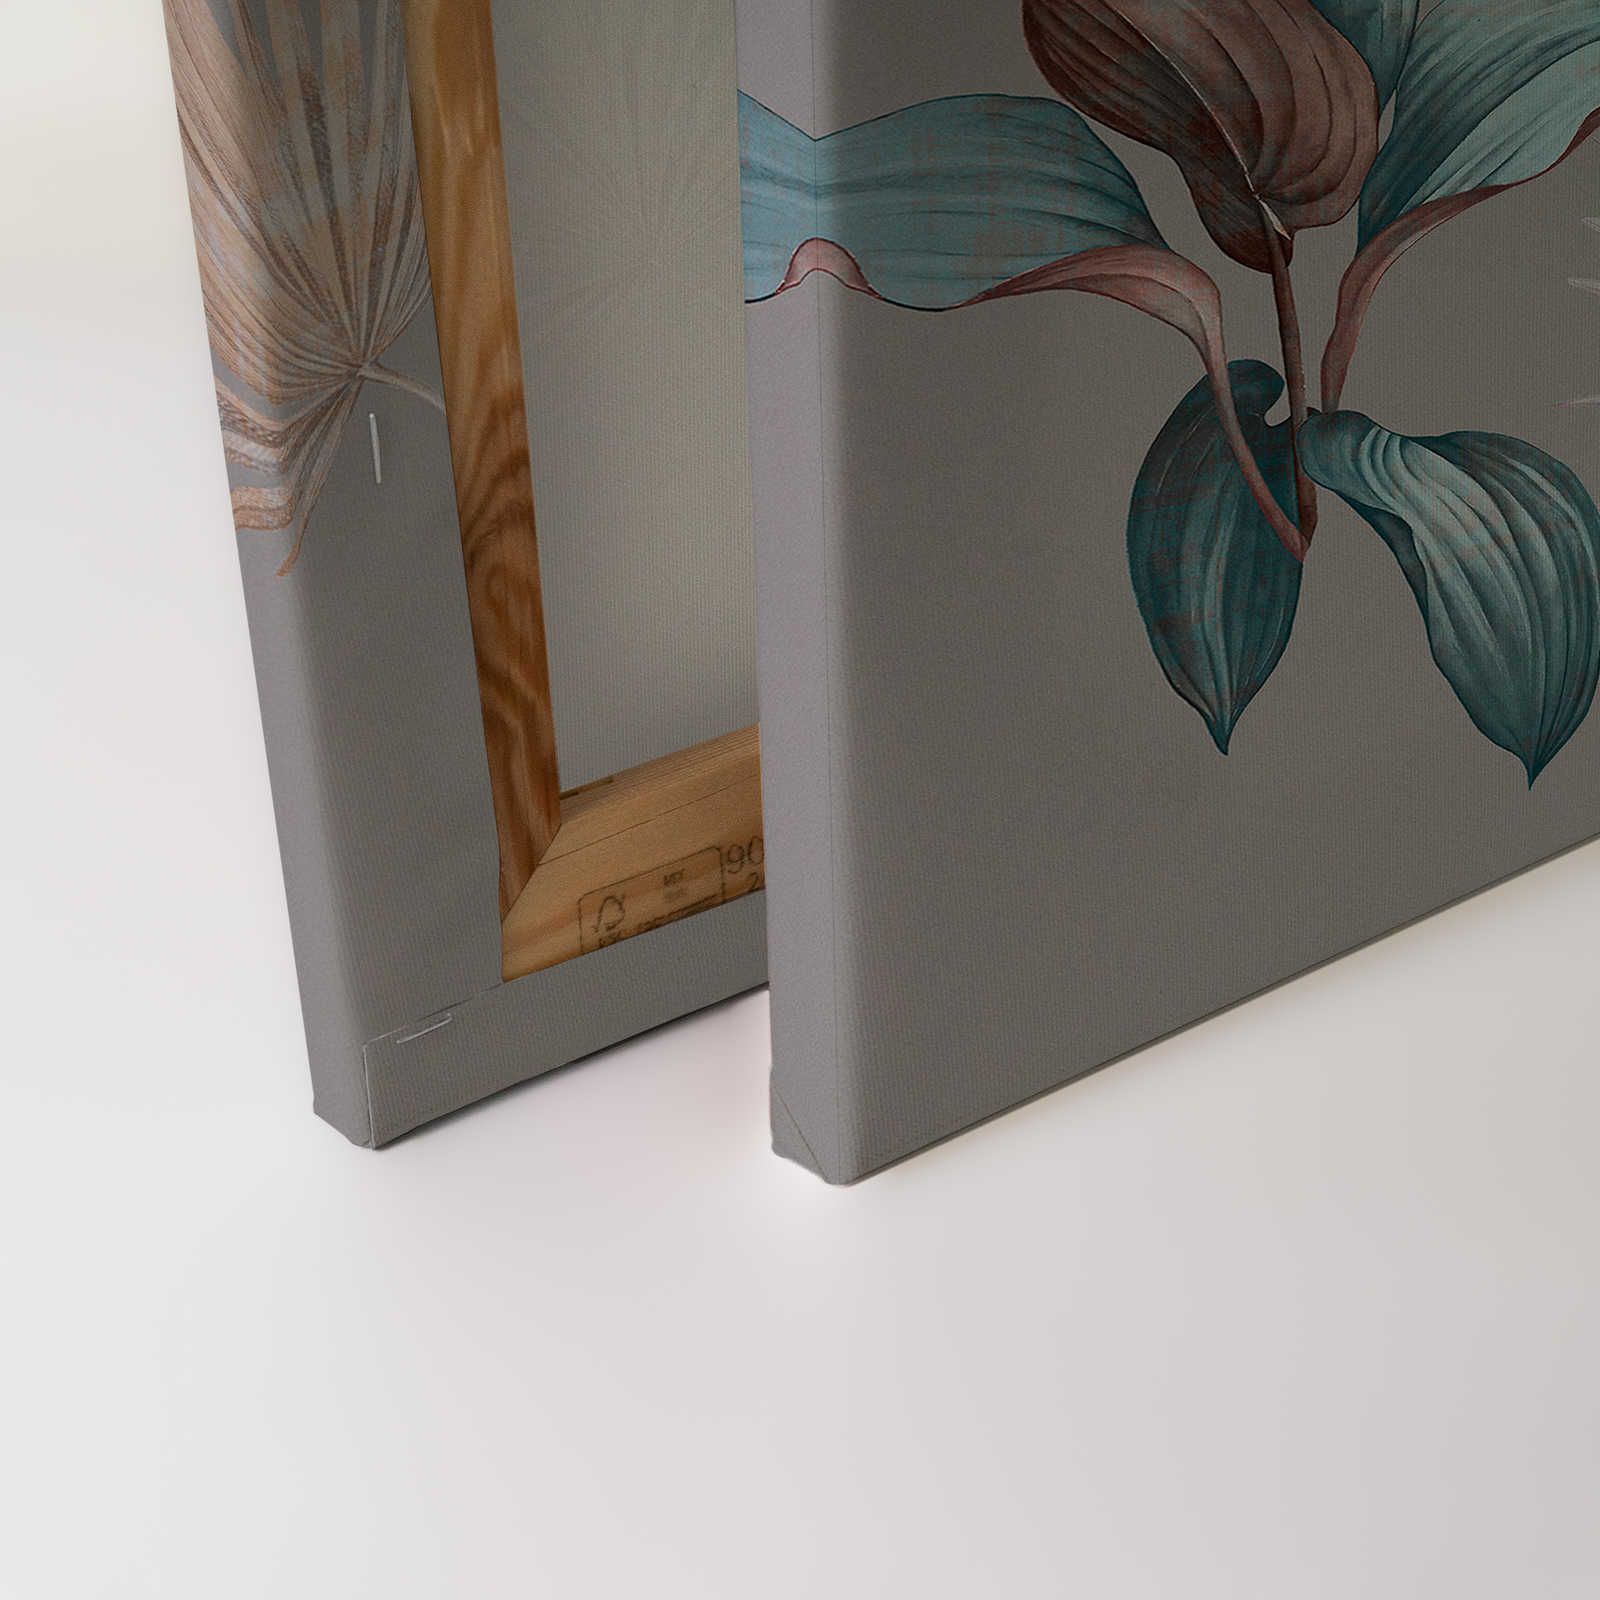             Brasilia 1 - Grey Canvas Painting Tropical Leaves in Petrol & Copper - 0.90 m x 0.60 m
        